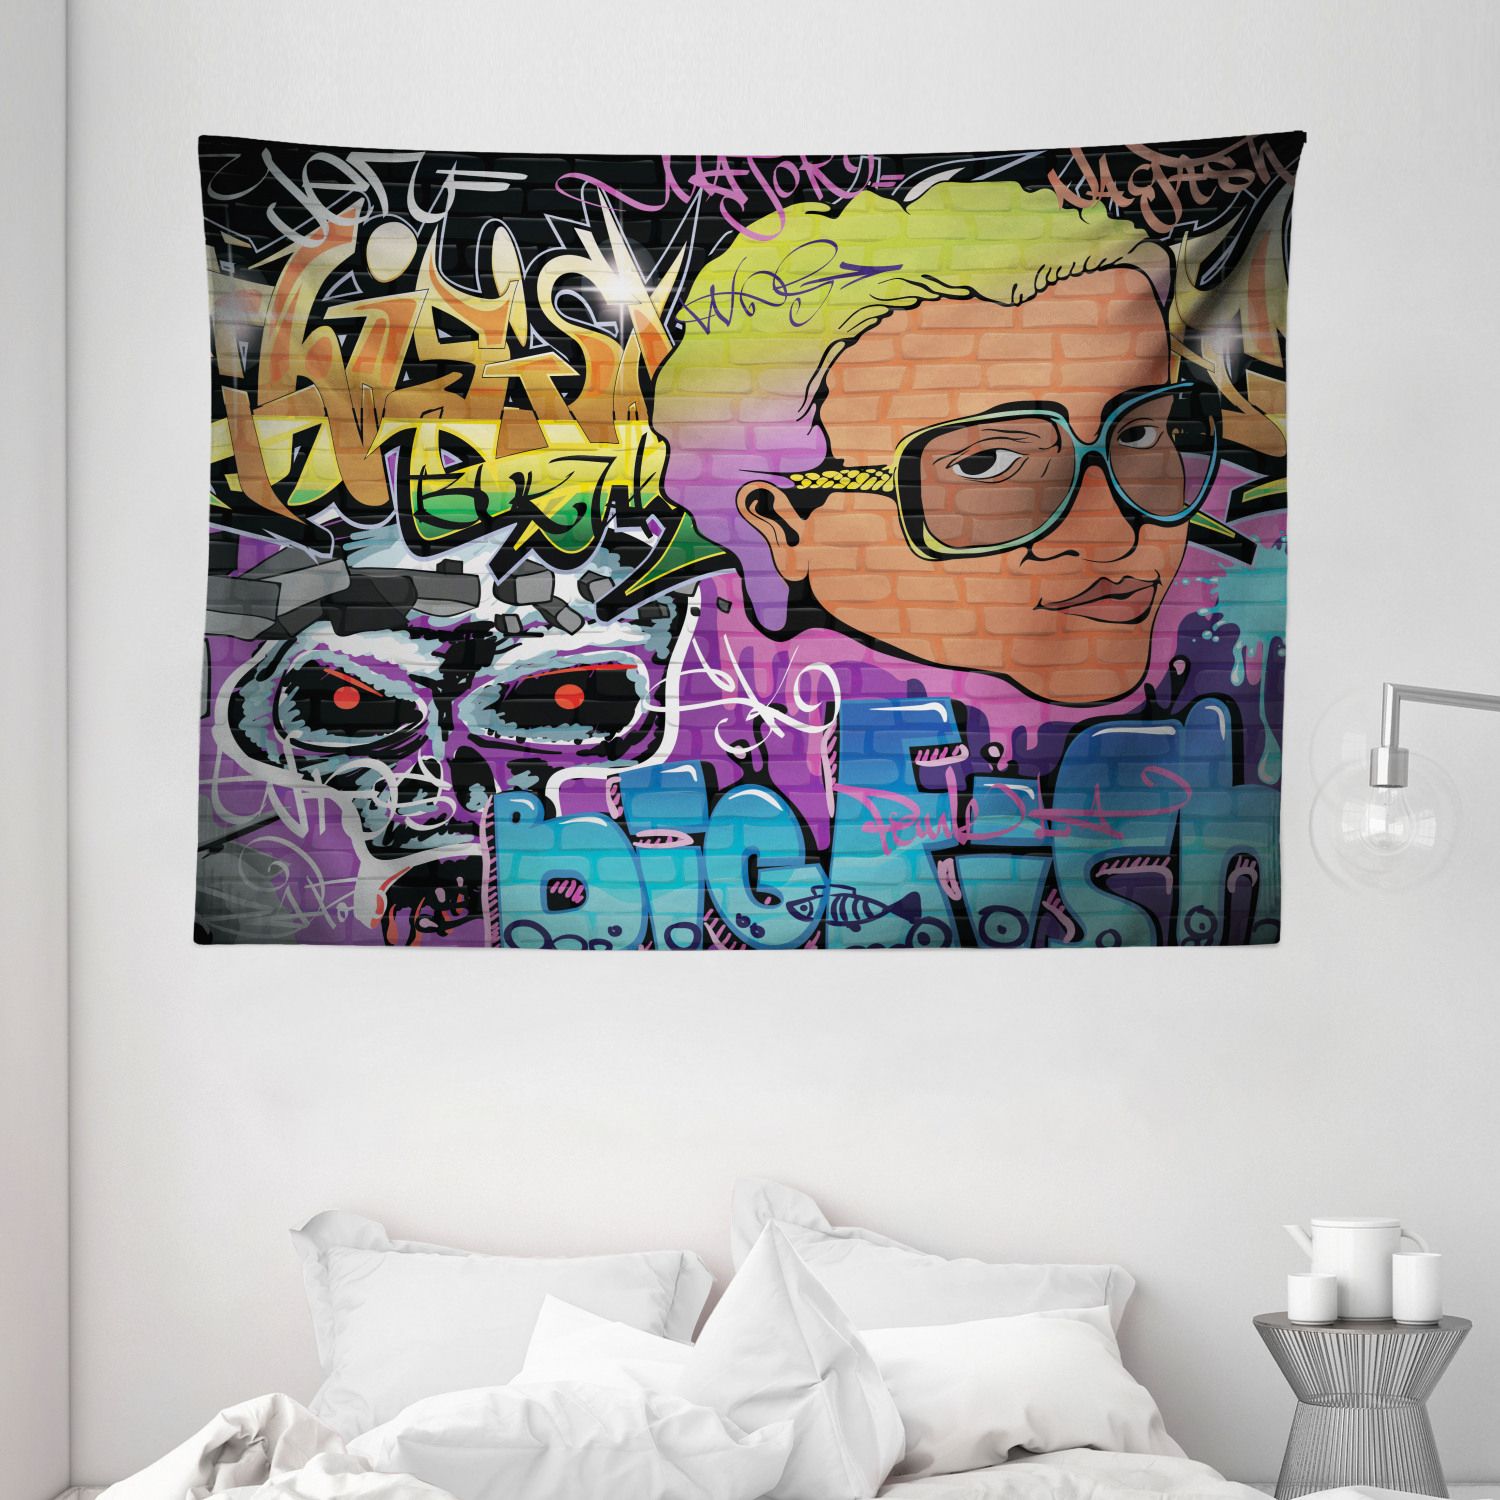 Urban Graffiti Tapestry, Artistic Hip Hop Design Graffiti Wall Urban Art  Background Man Head Detail, Wall Hanging For Bedroom Living Room Dorm Decor,  80w X 60l Inches, Multicolor,ambesonne – Walmart For Most Recent Hip Hop Design Wall Art (View 13 of 20)